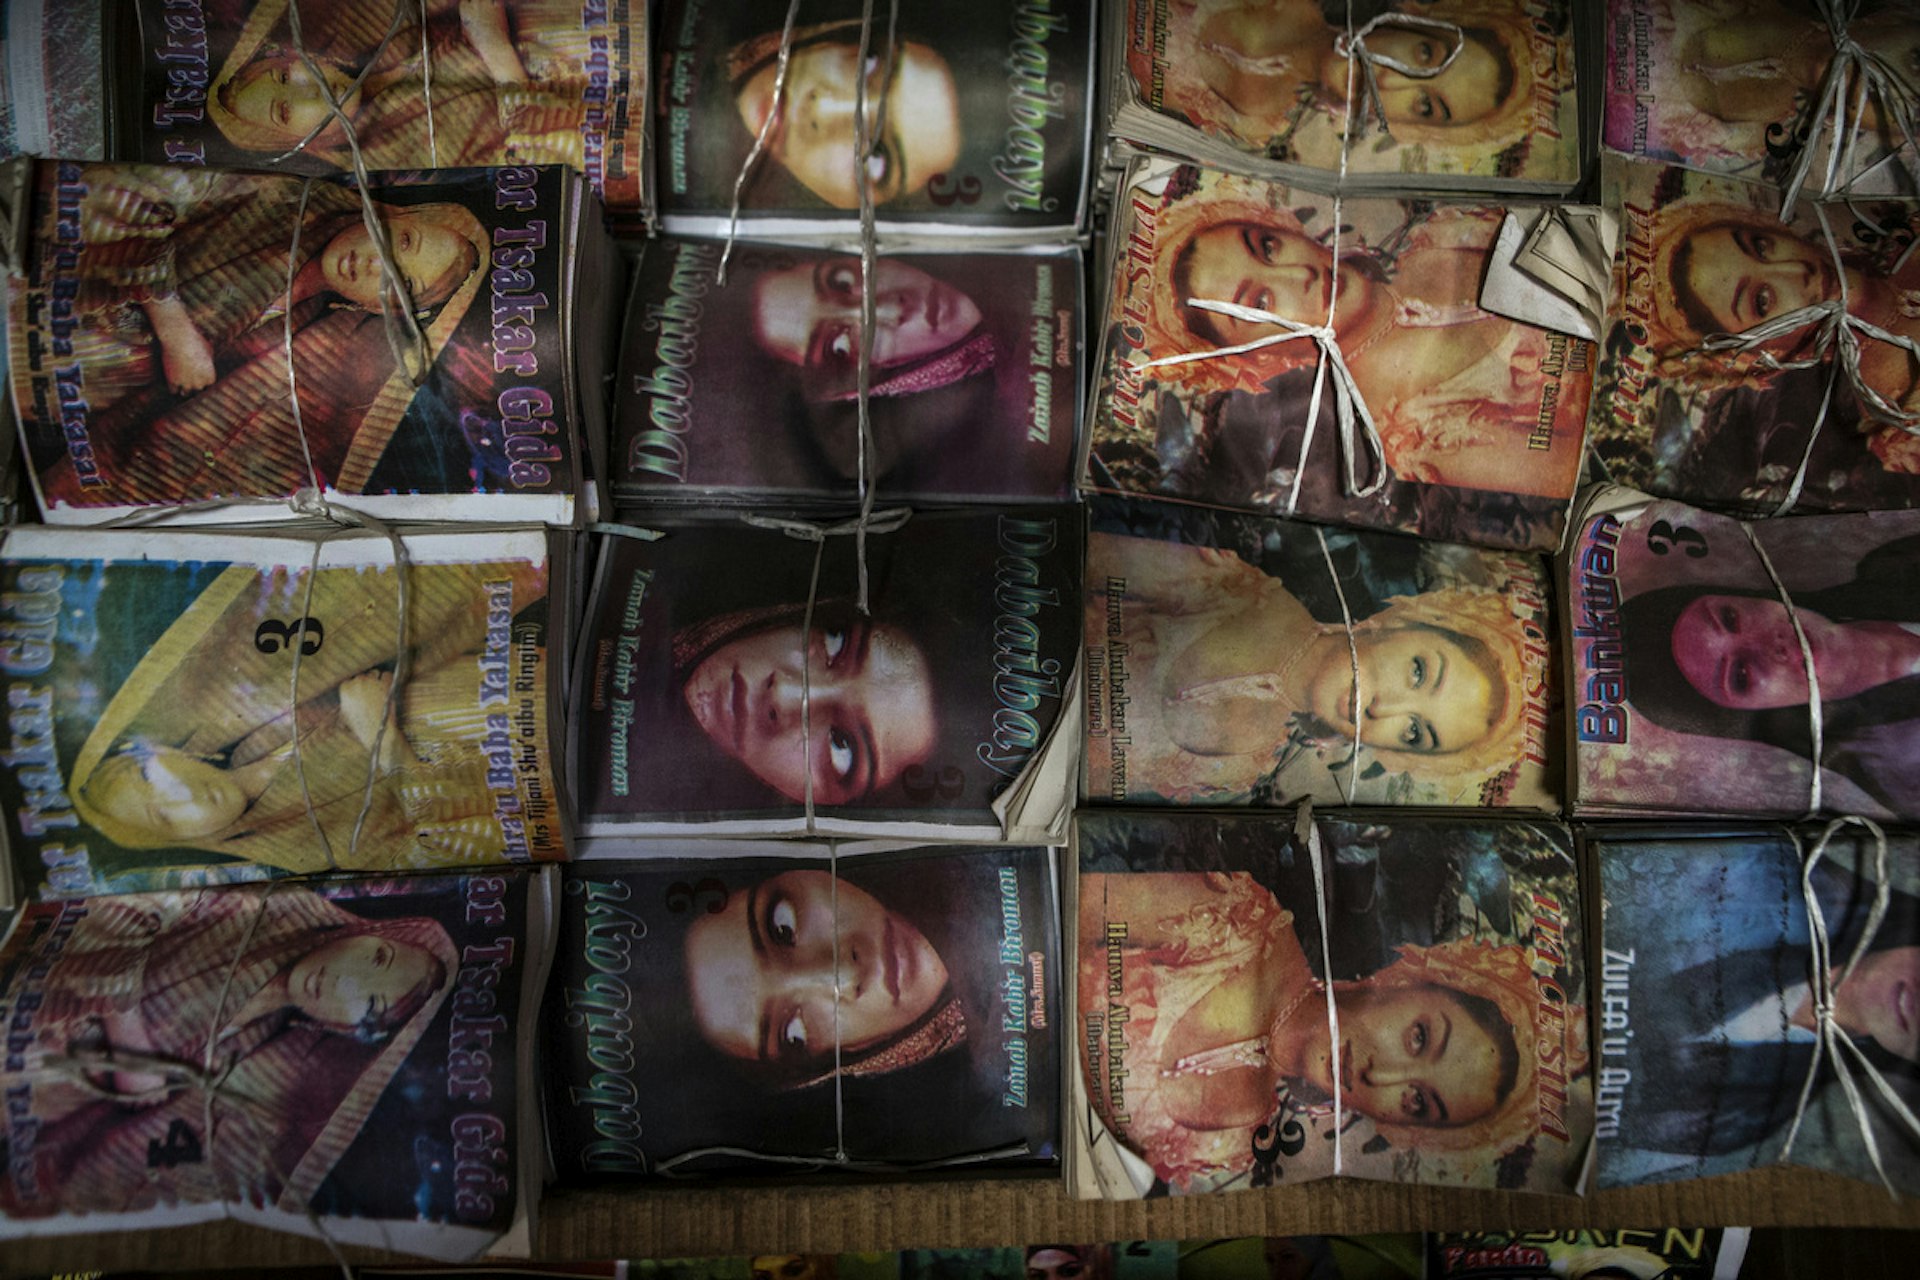 Subversive romance novels are tied up and packaged at the local market in Kano.